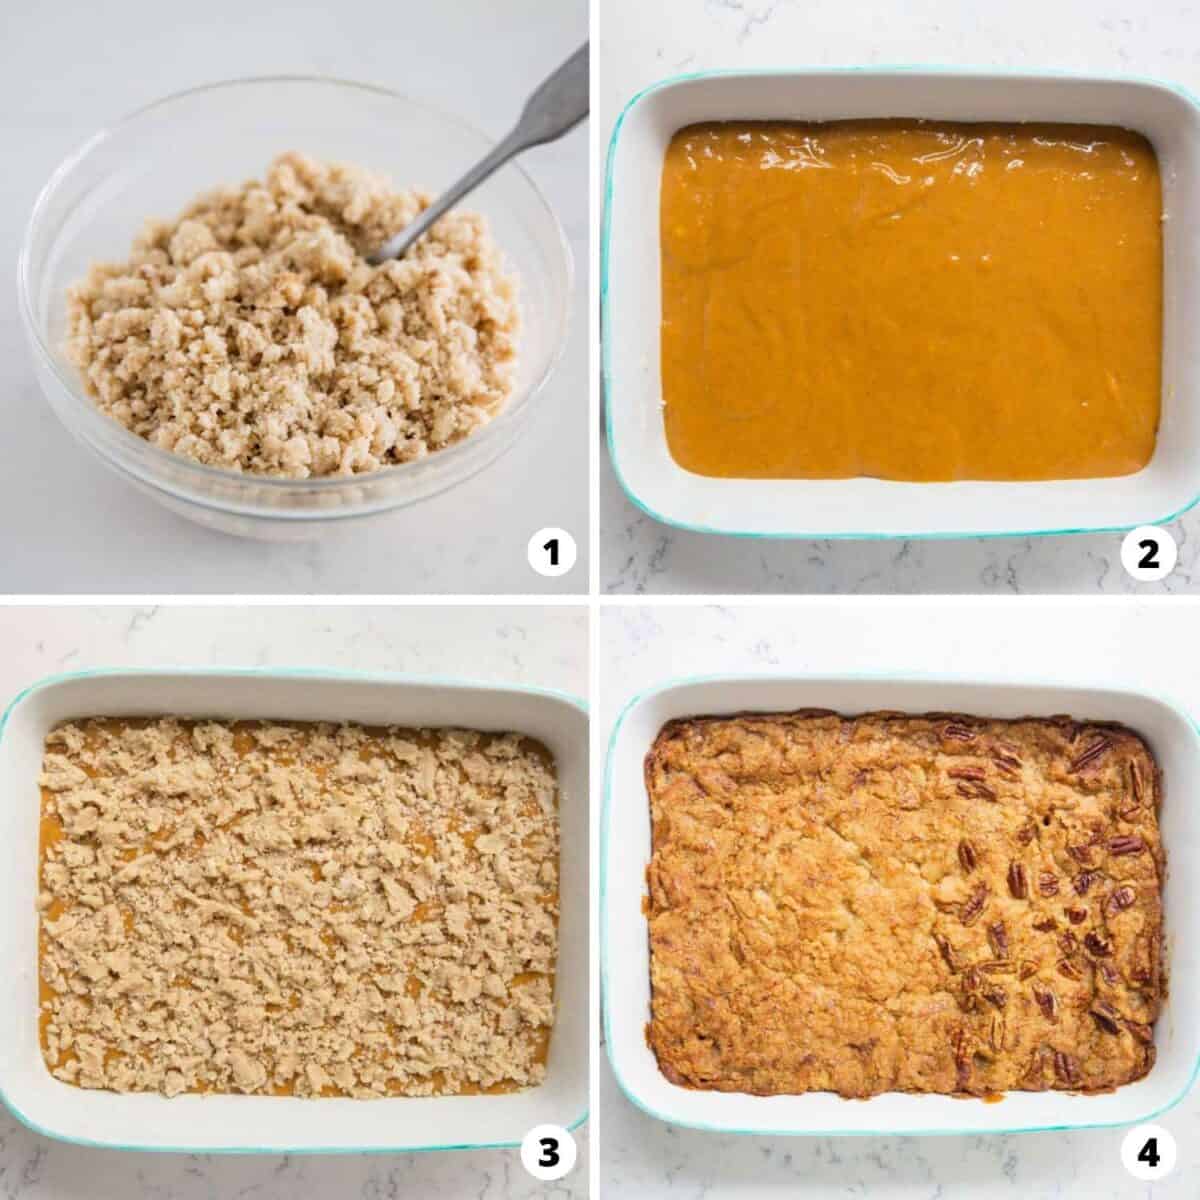 Showing how to make pumpkin crunch cake in a 4 step collage.